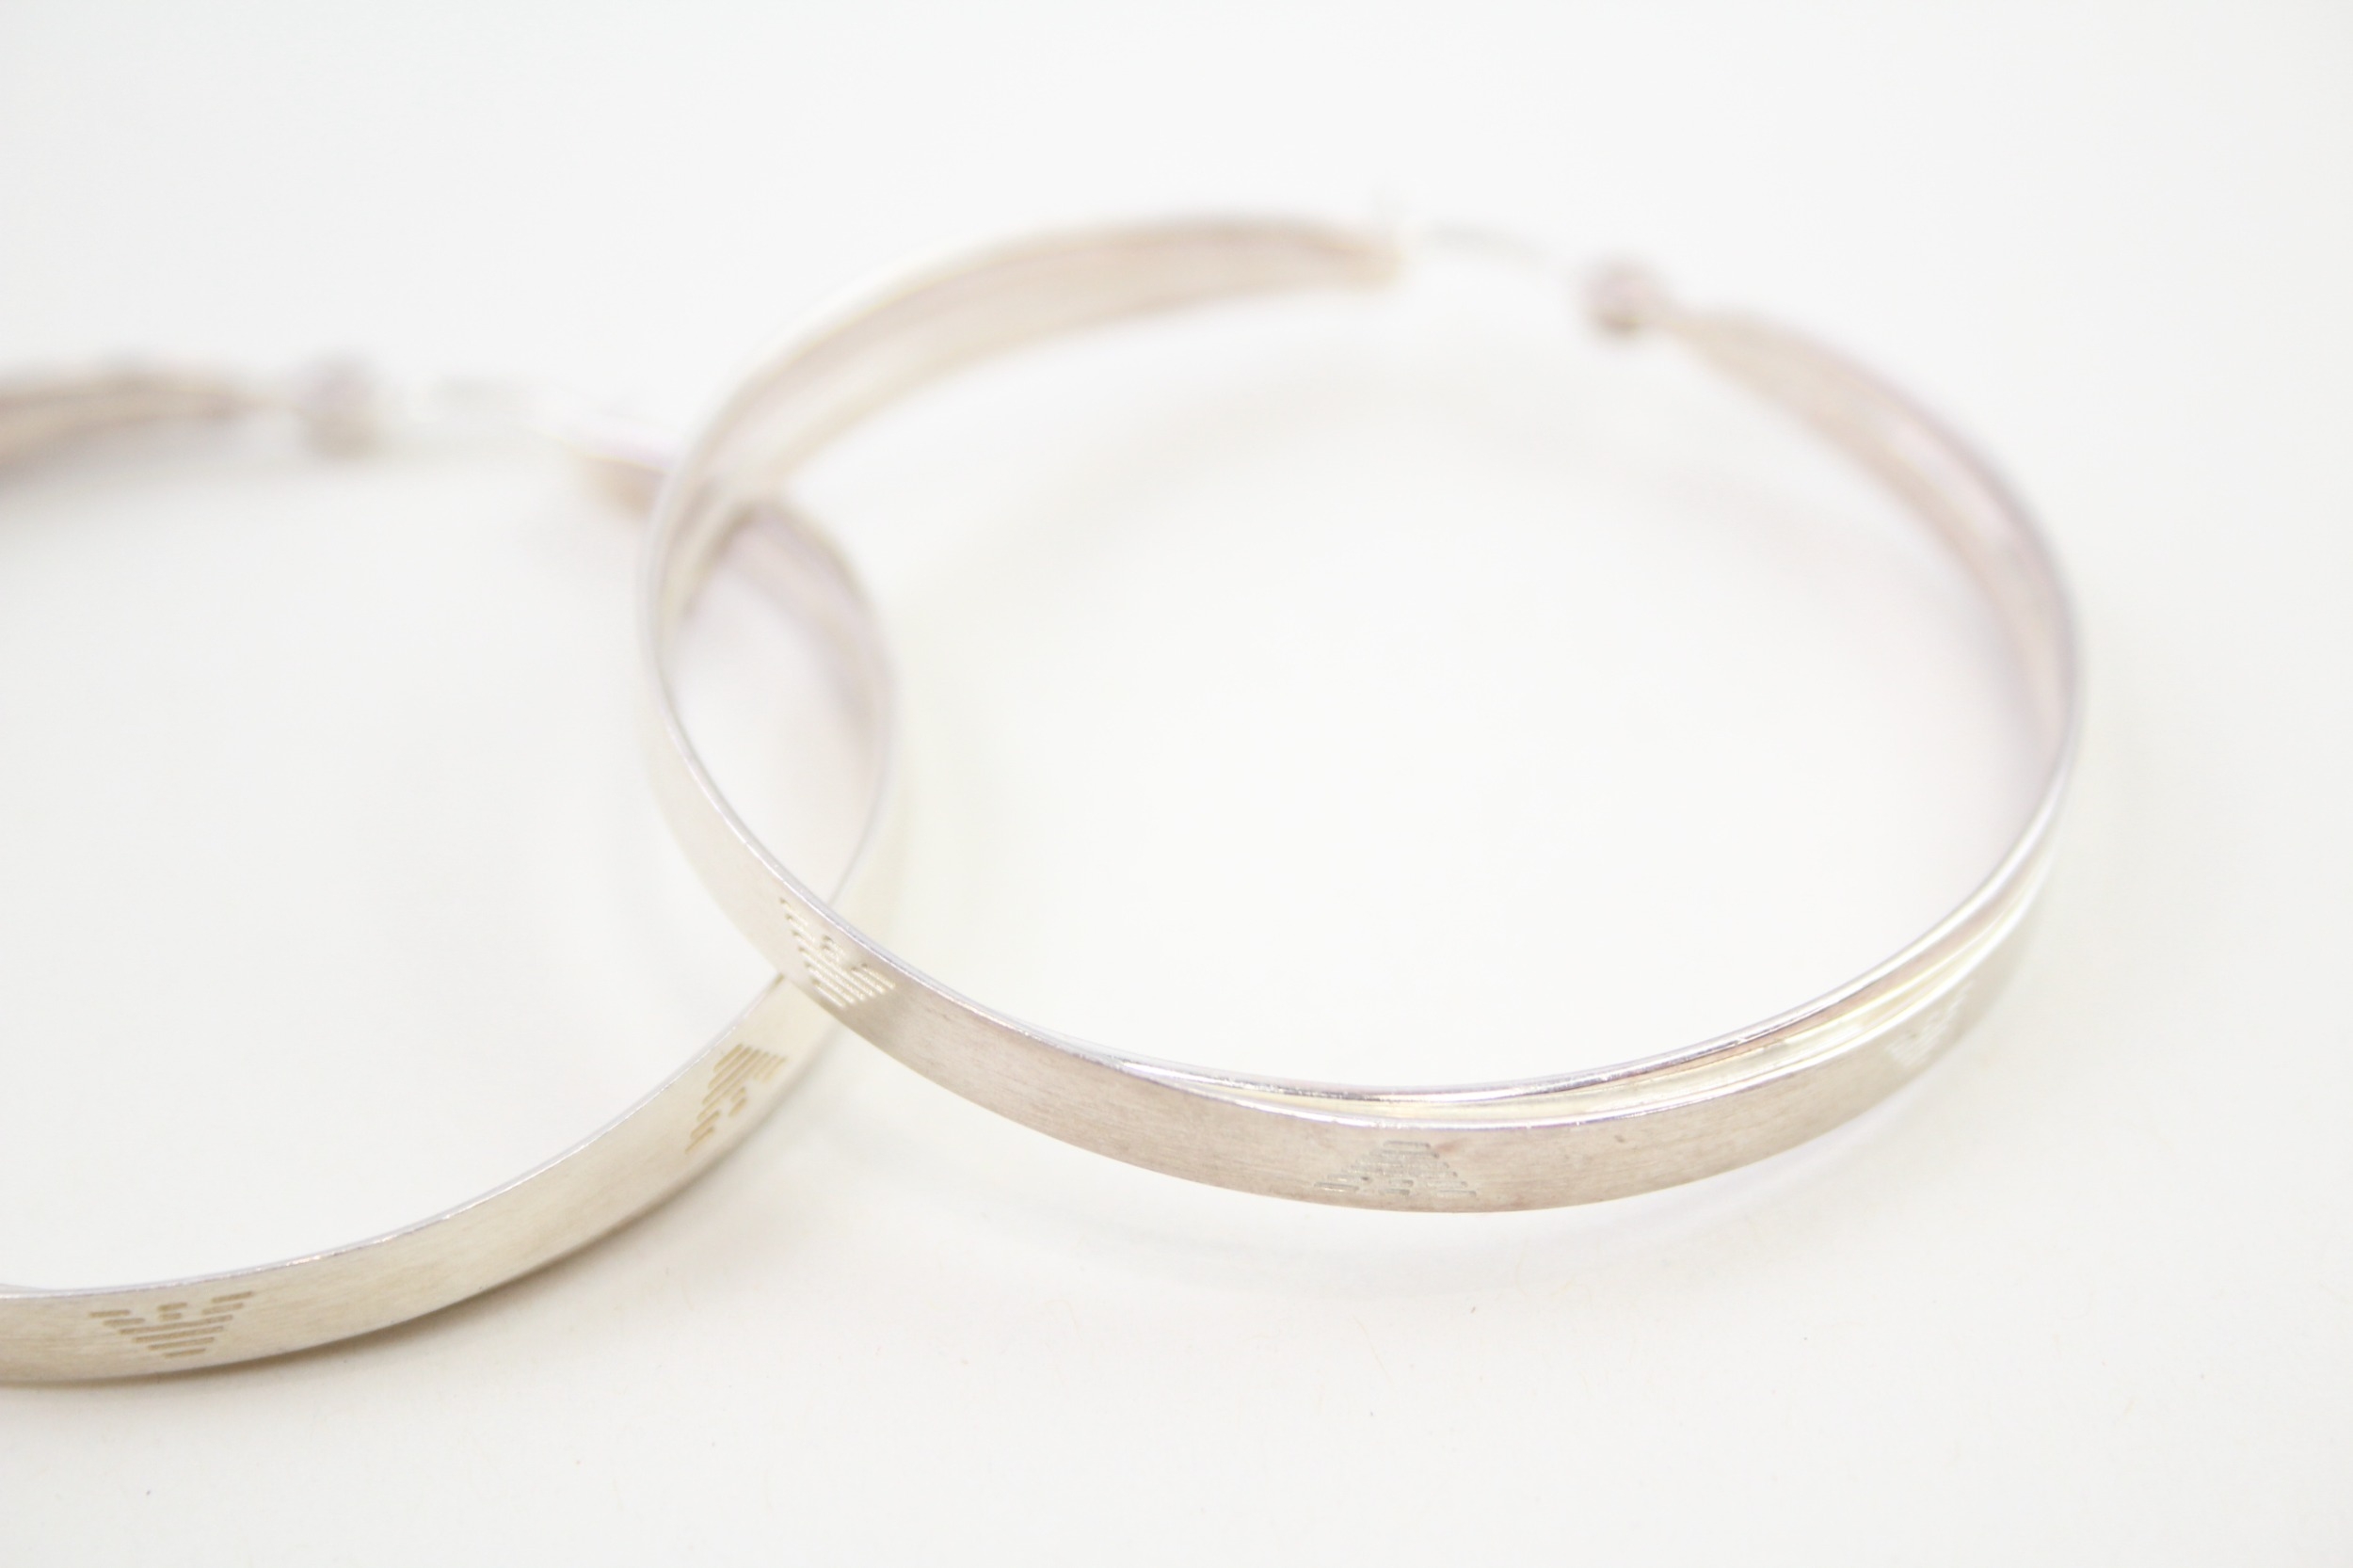 A pair of silver hoop earrings by Emporio Armani (14g) - Image 2 of 5